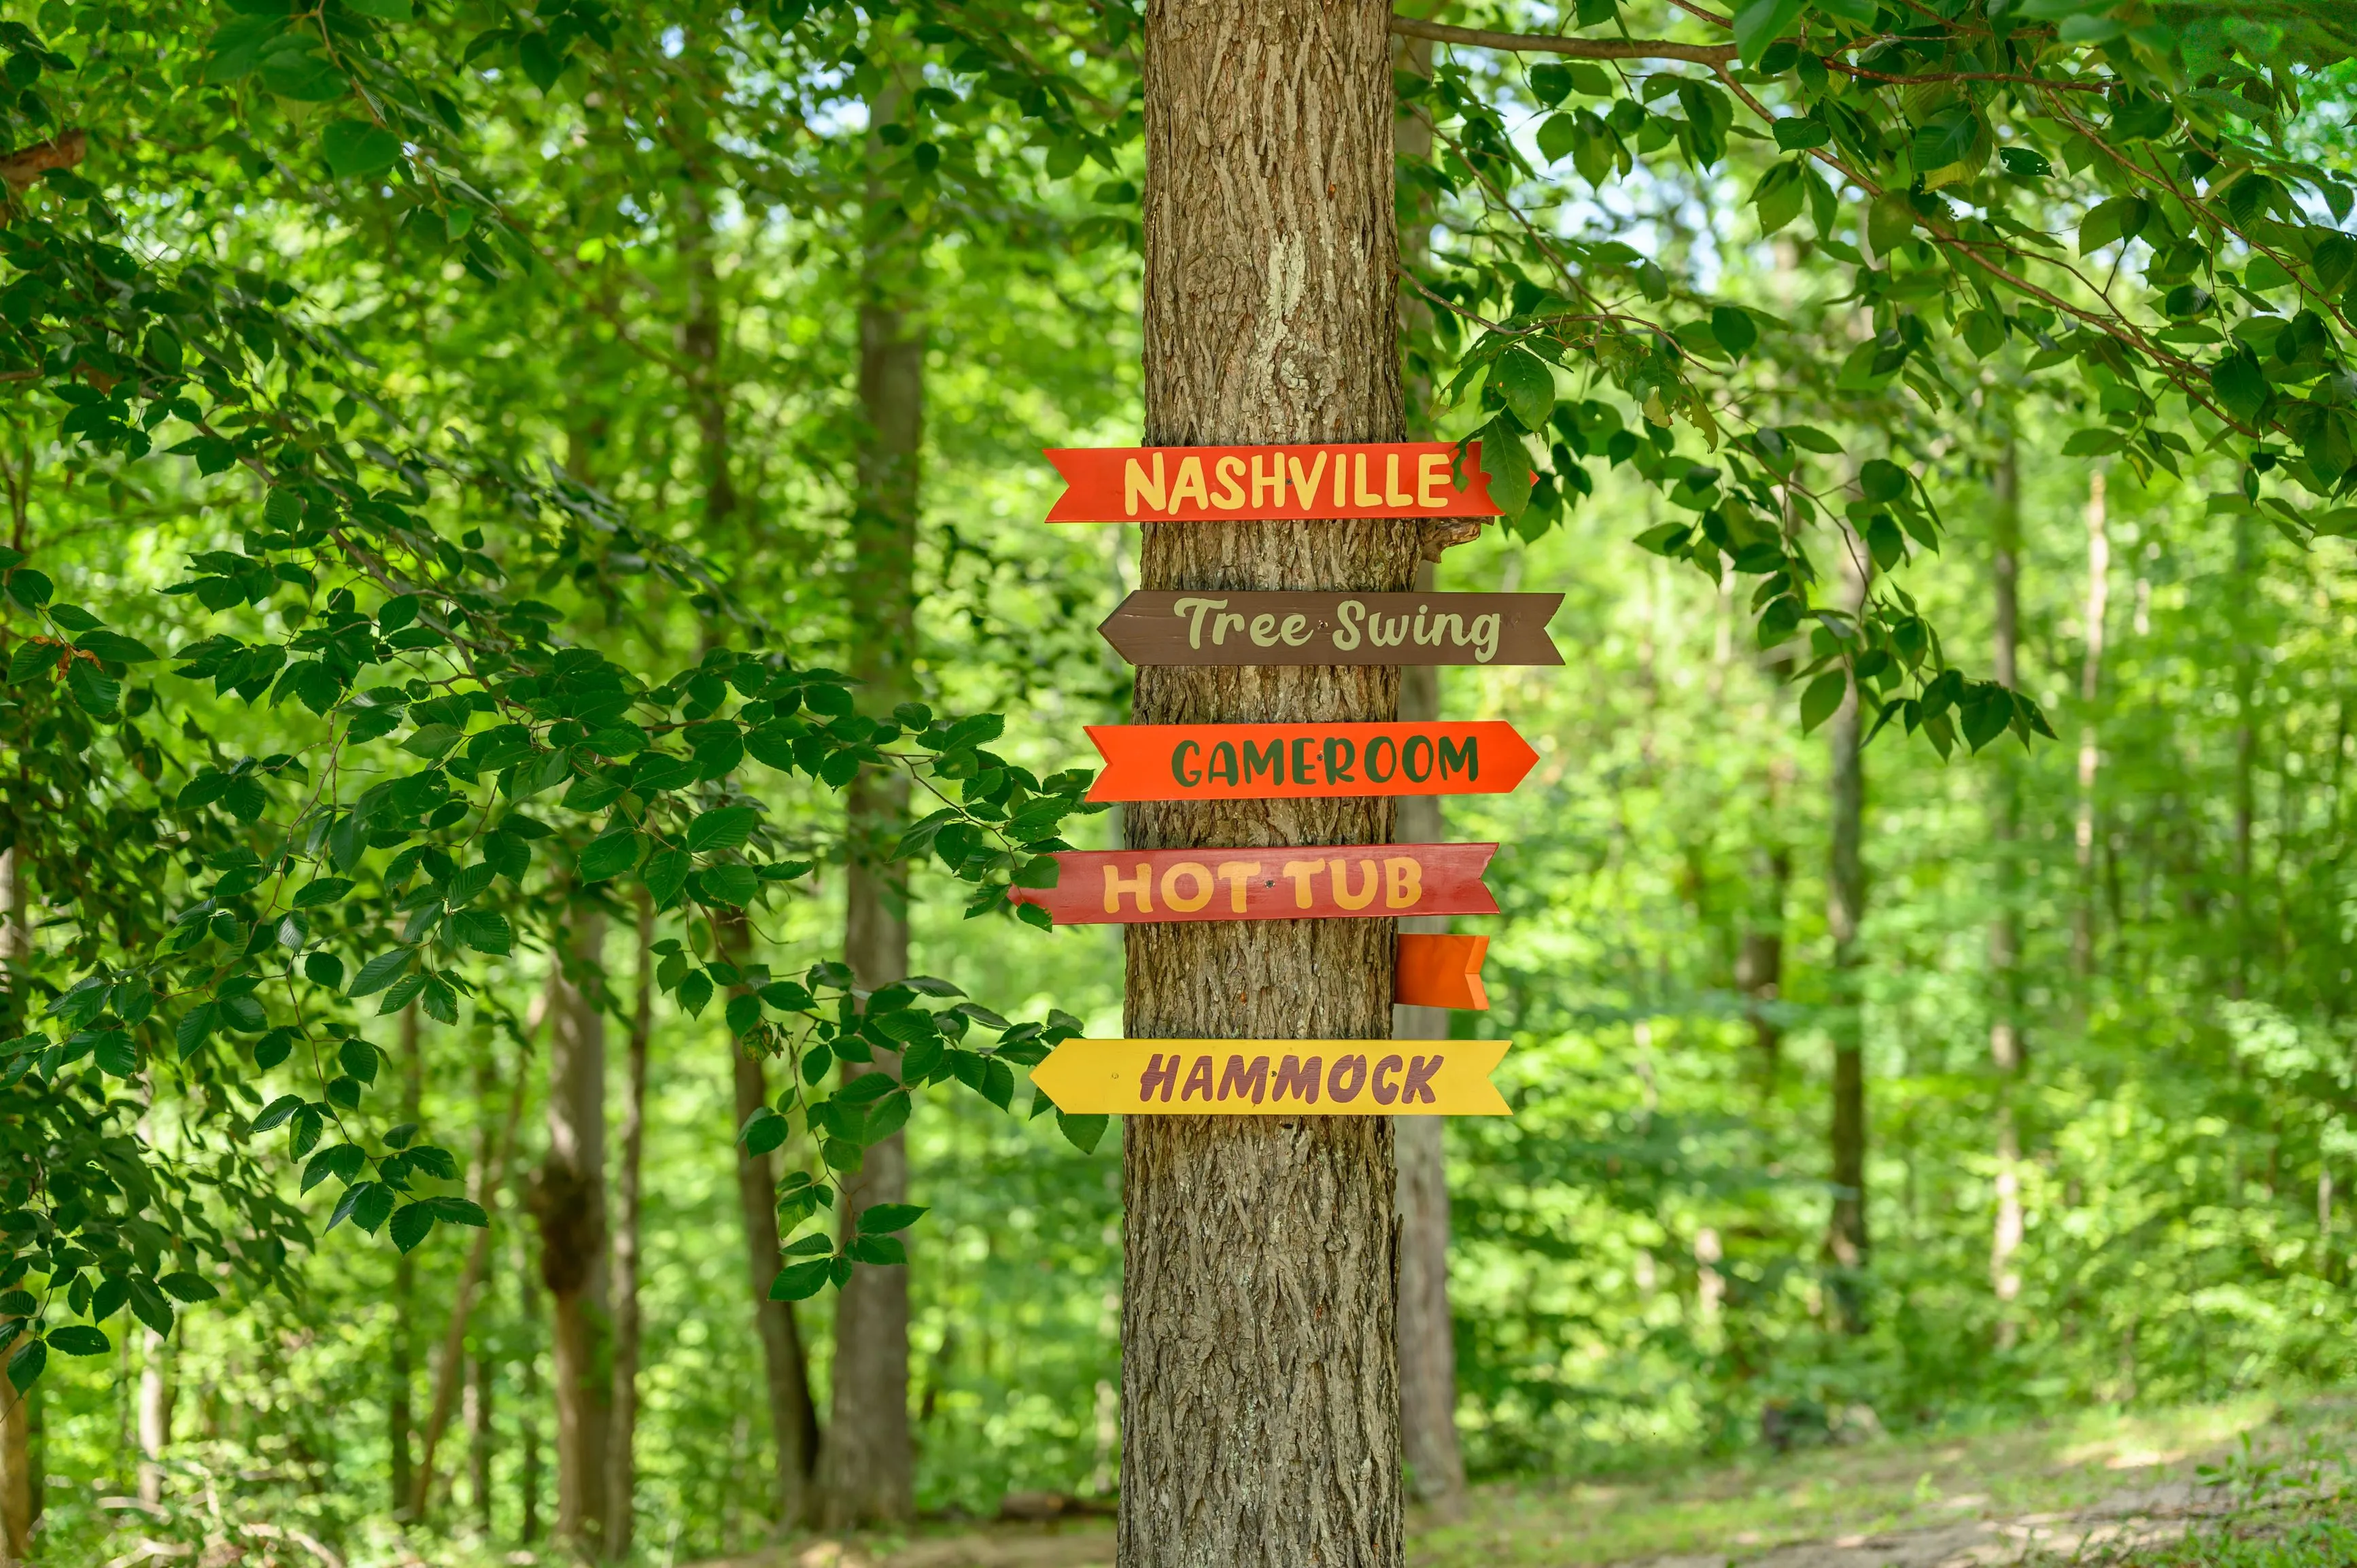 Colorful direction signs nailed to a tree in a lush green forest, indicating locations like Nashville, tree swing, gameroom, hot tub, and hammock.